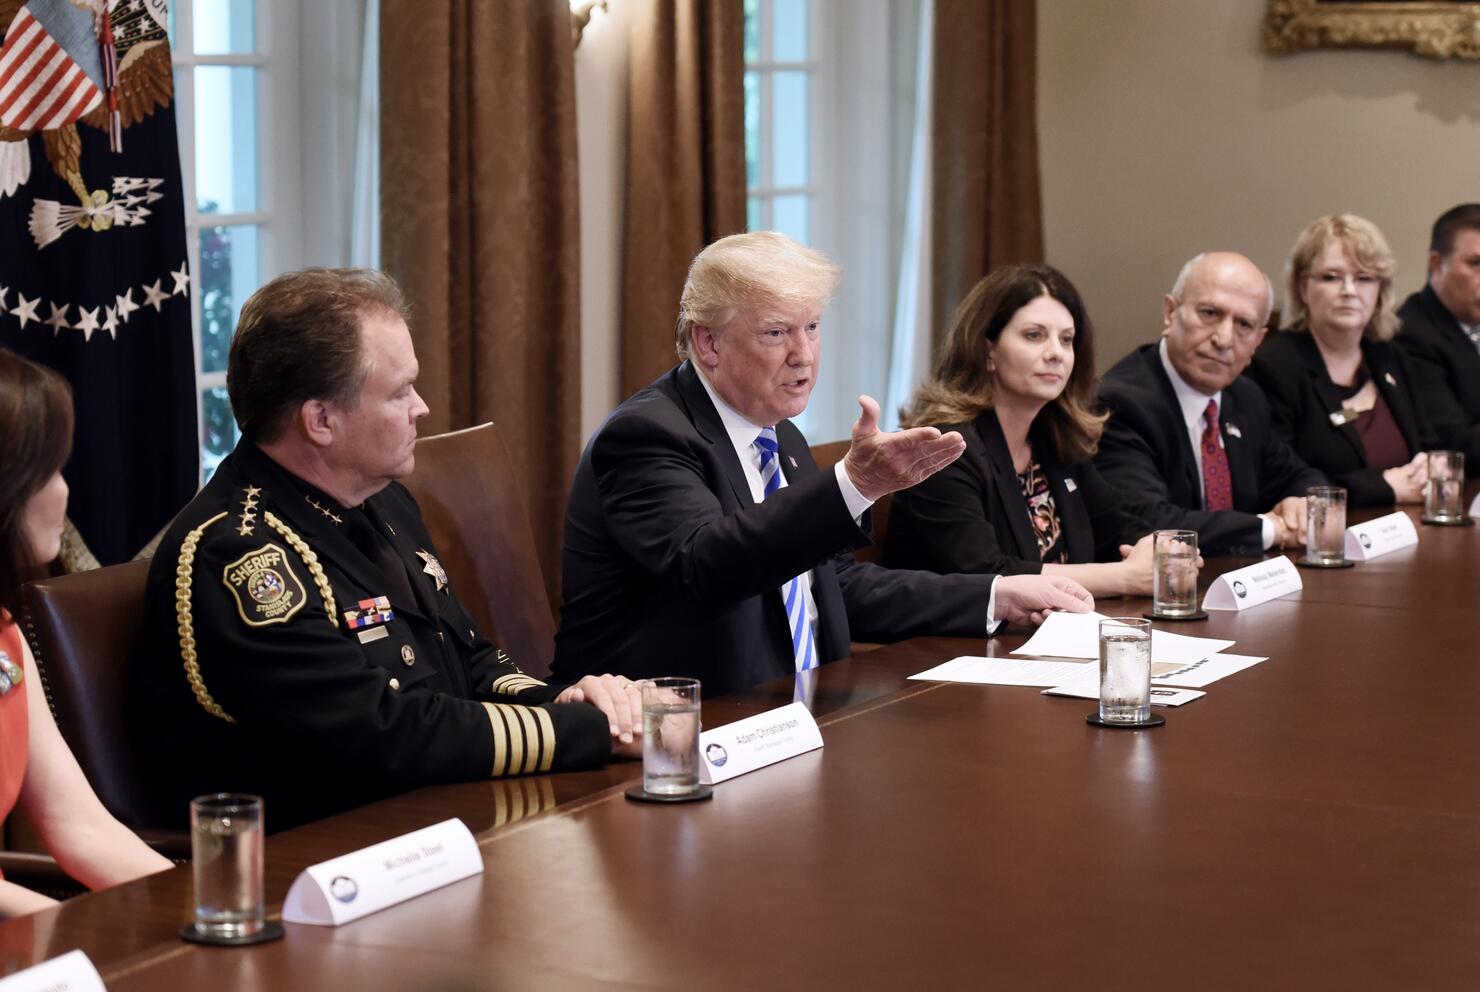 Trump hosts California leaders for immigration meeting